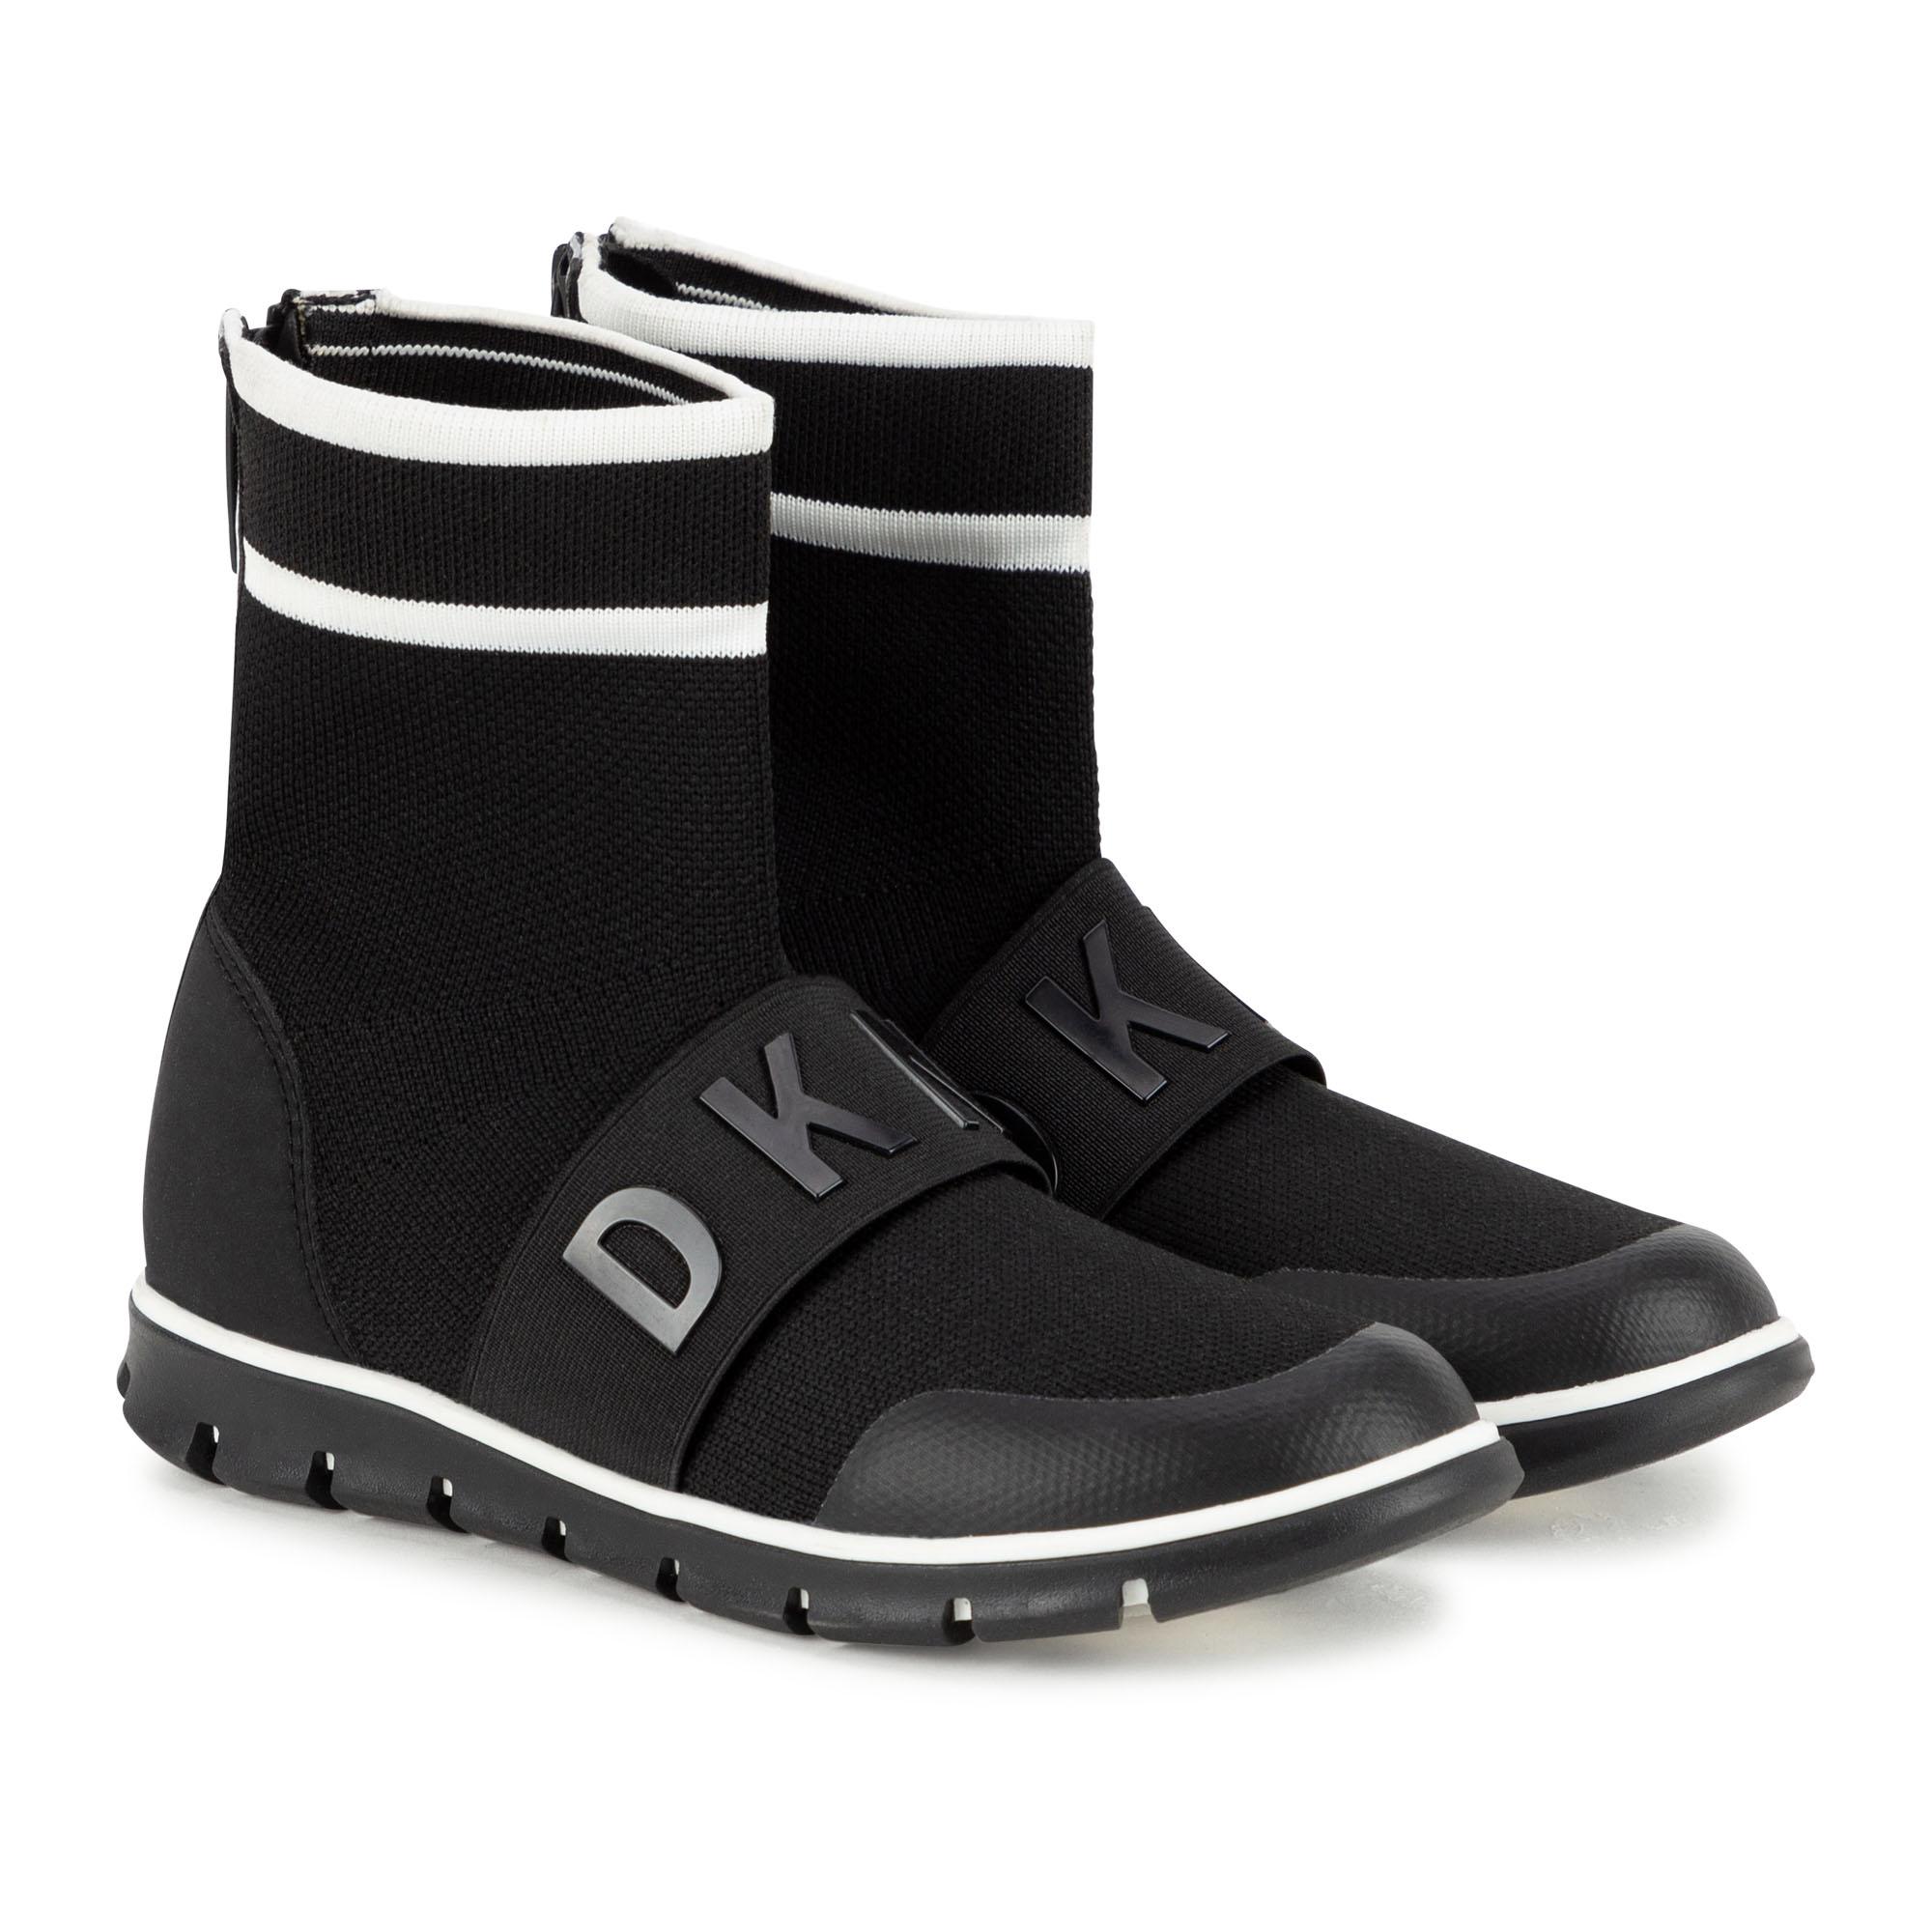 Tricot sock shoes DKNY for GIRL